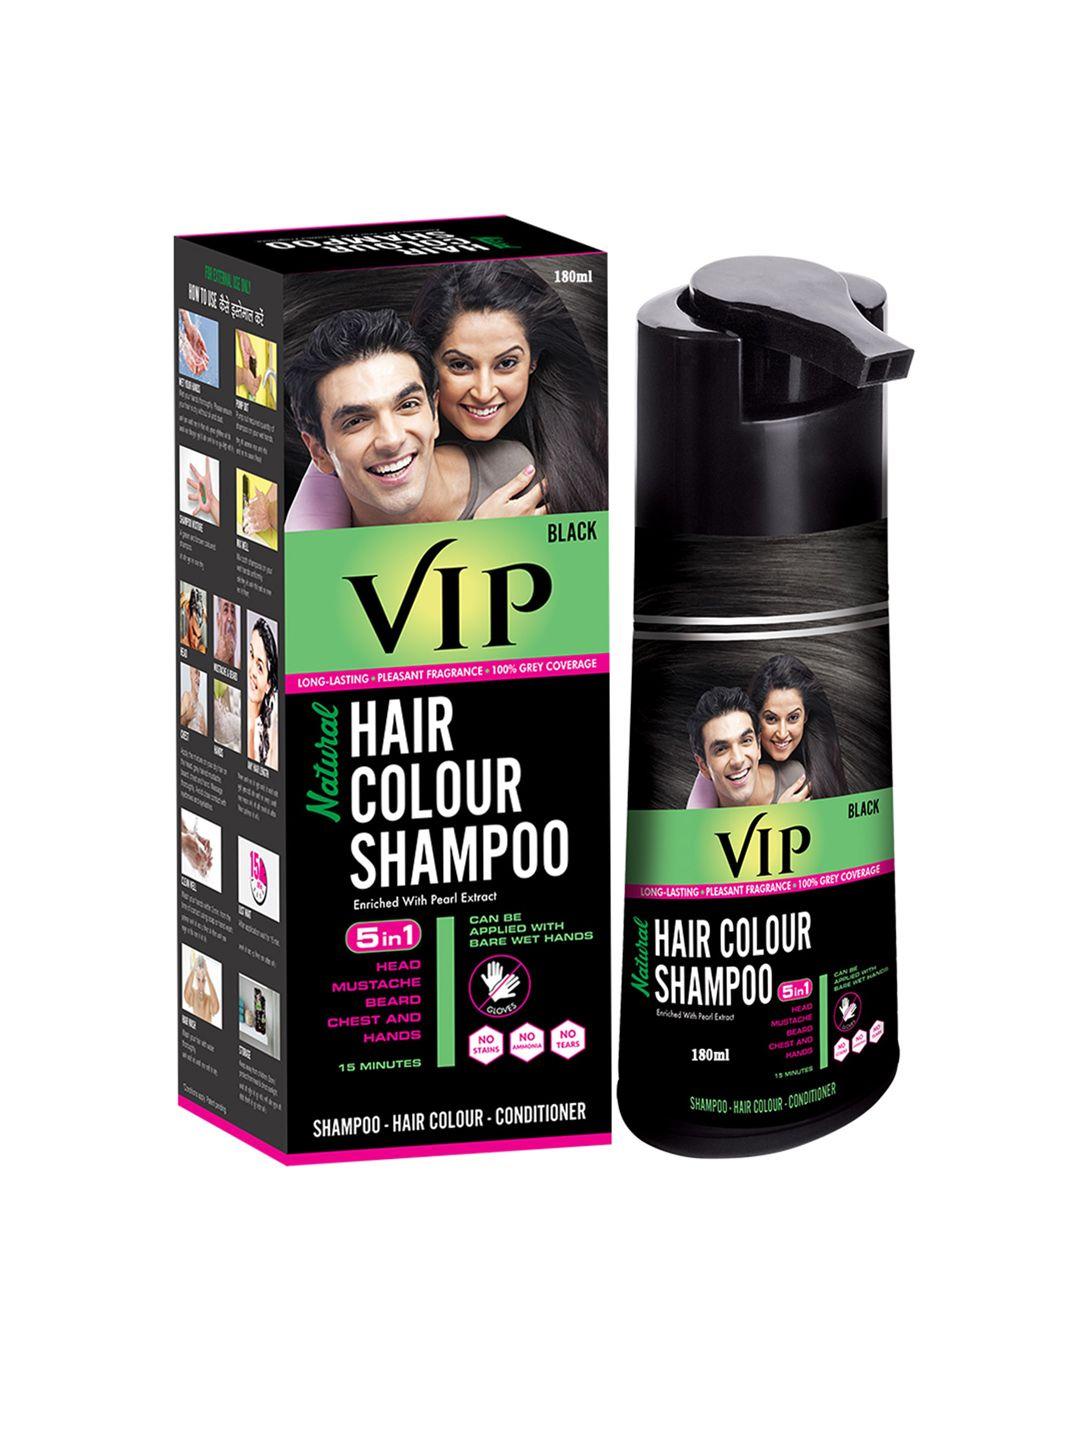 vip hair colour shampoo cum conditioner with pearl extract - black 180ml